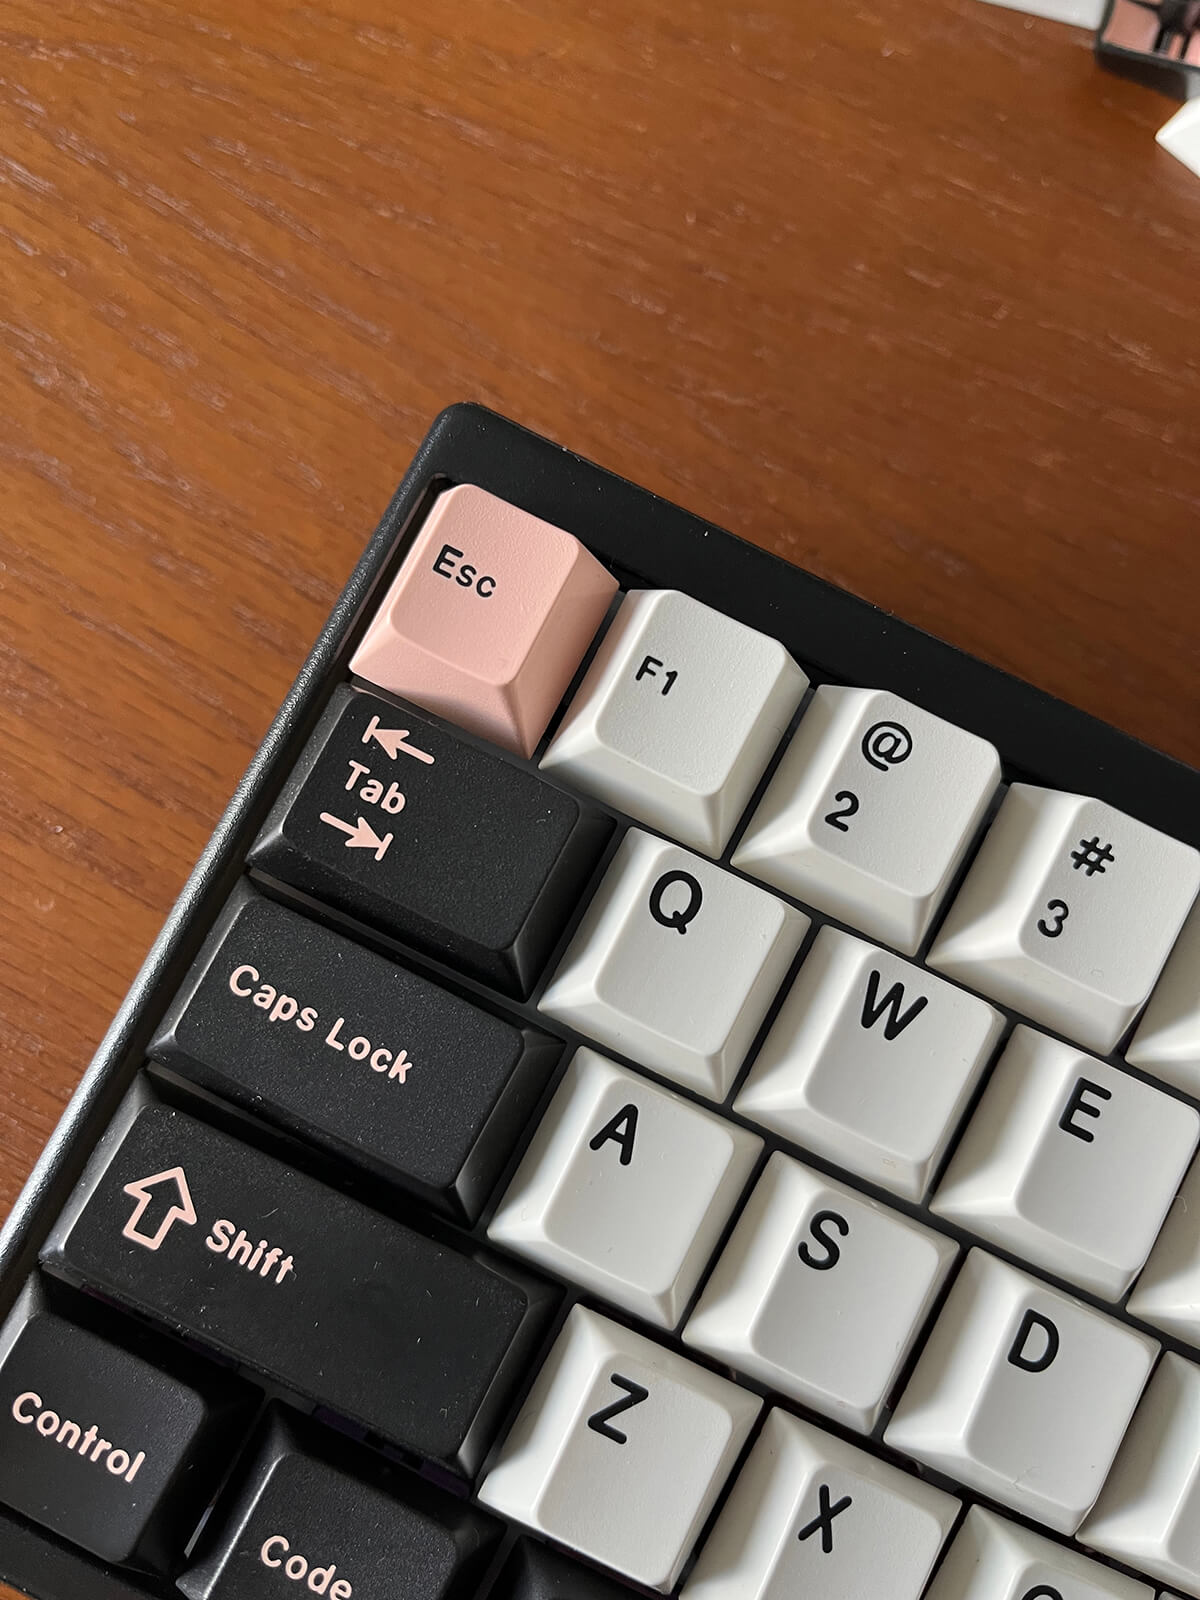 Keyboard with an F1 keycap in place of a proper 1 keycap.